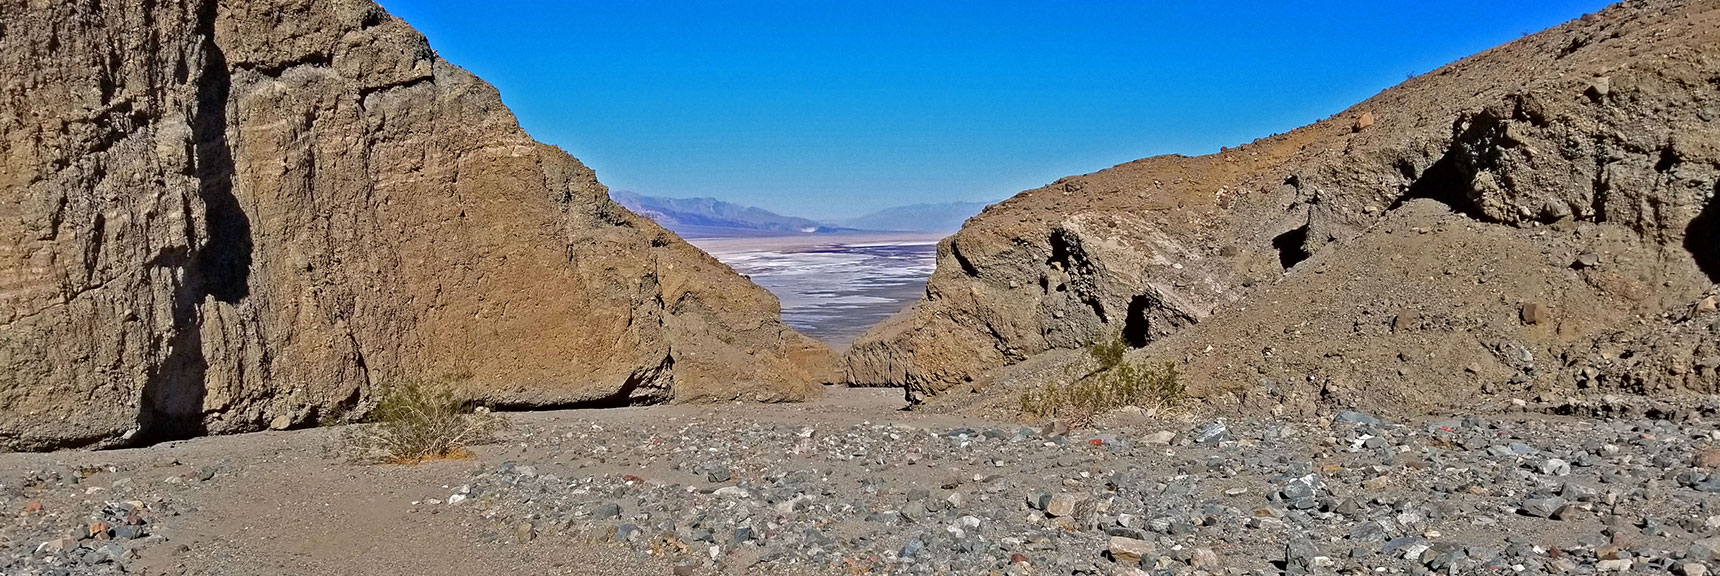 View Down Main Canyon from Higher Perspective | Sidewinder Canyon | Death Valley National Park, California